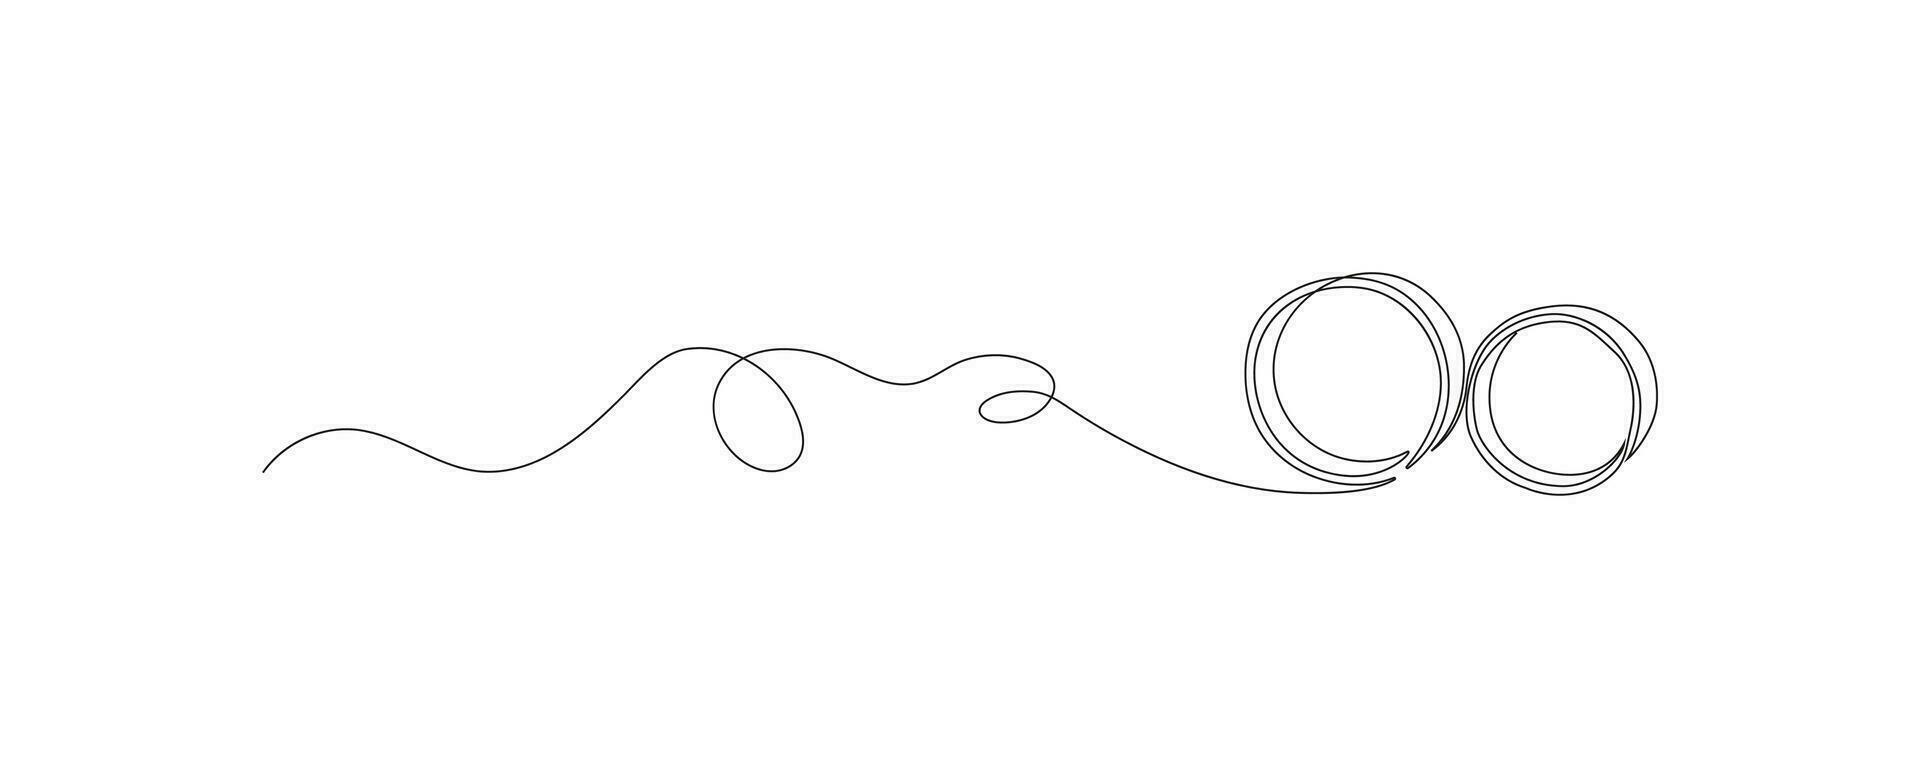 One continuous line drawing of two wedding rings. Subtle swirls and romantic symbols in a simple linear style. Editable stroke. Minimalistic Doodle vector illustration.